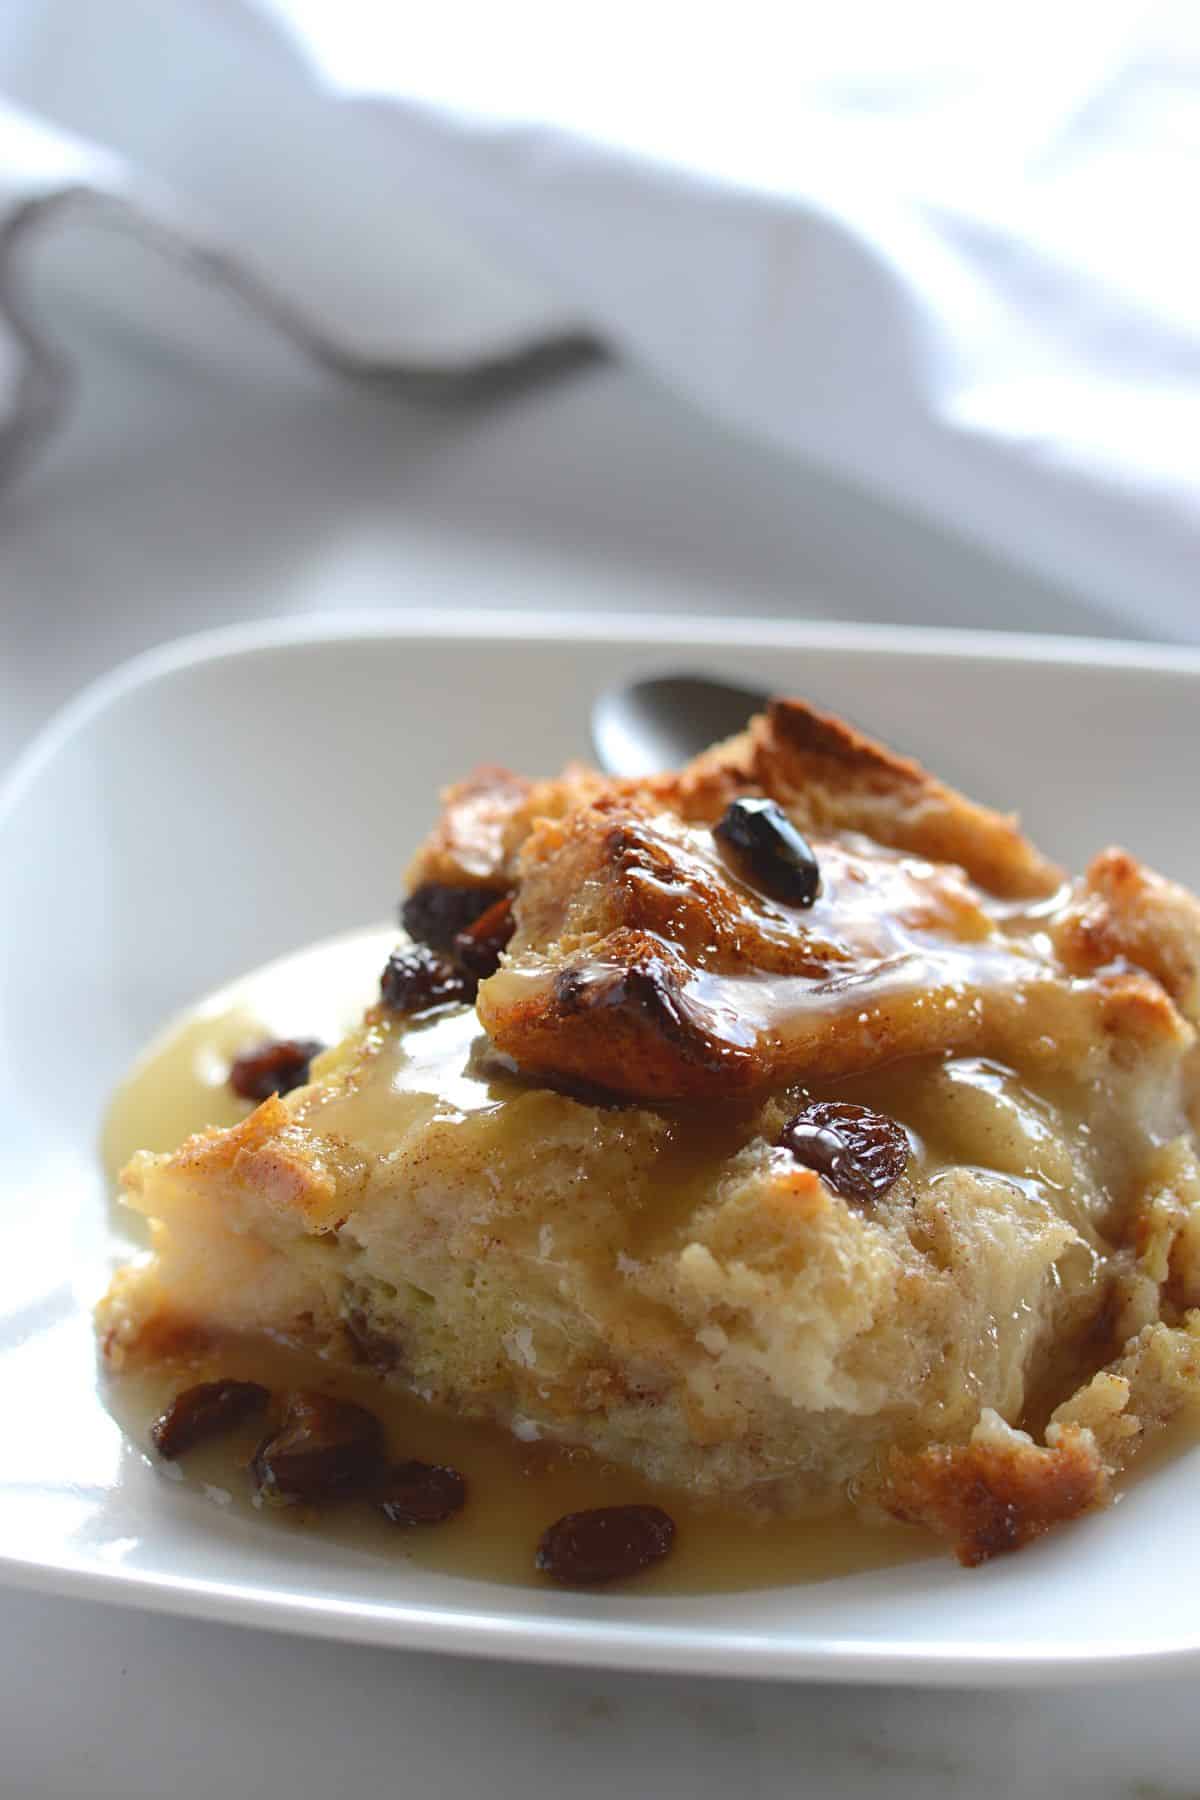 A piece of bread pudding with sauce on a white dessert plate.